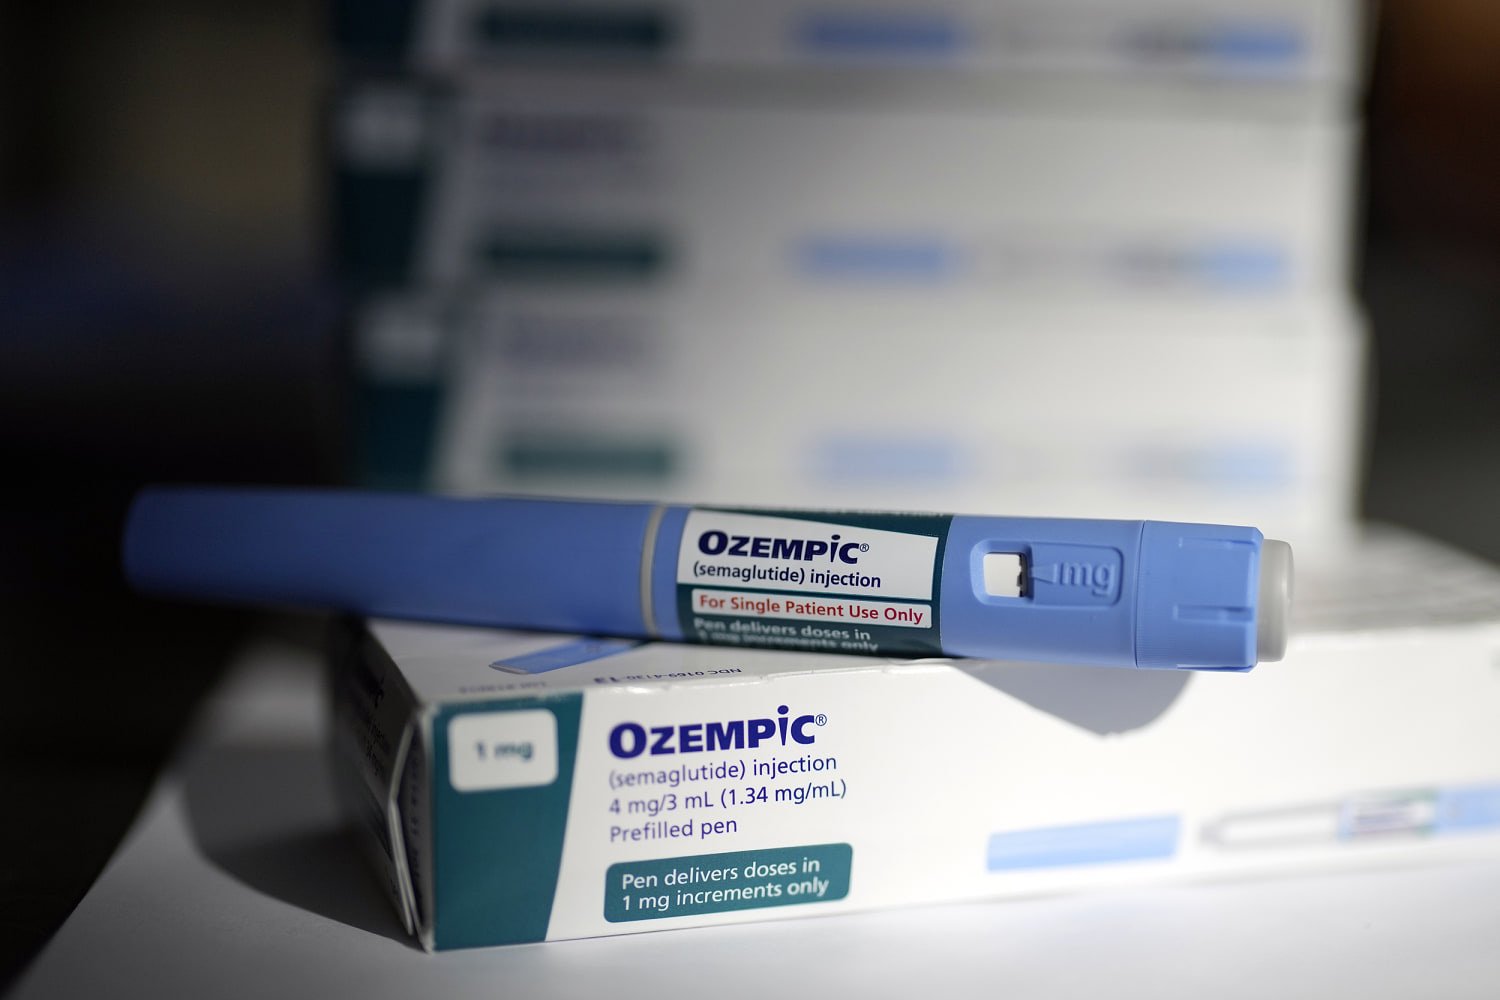 Ozempic isn't linked to suicidal thoughts, U.S. and European health agencies find